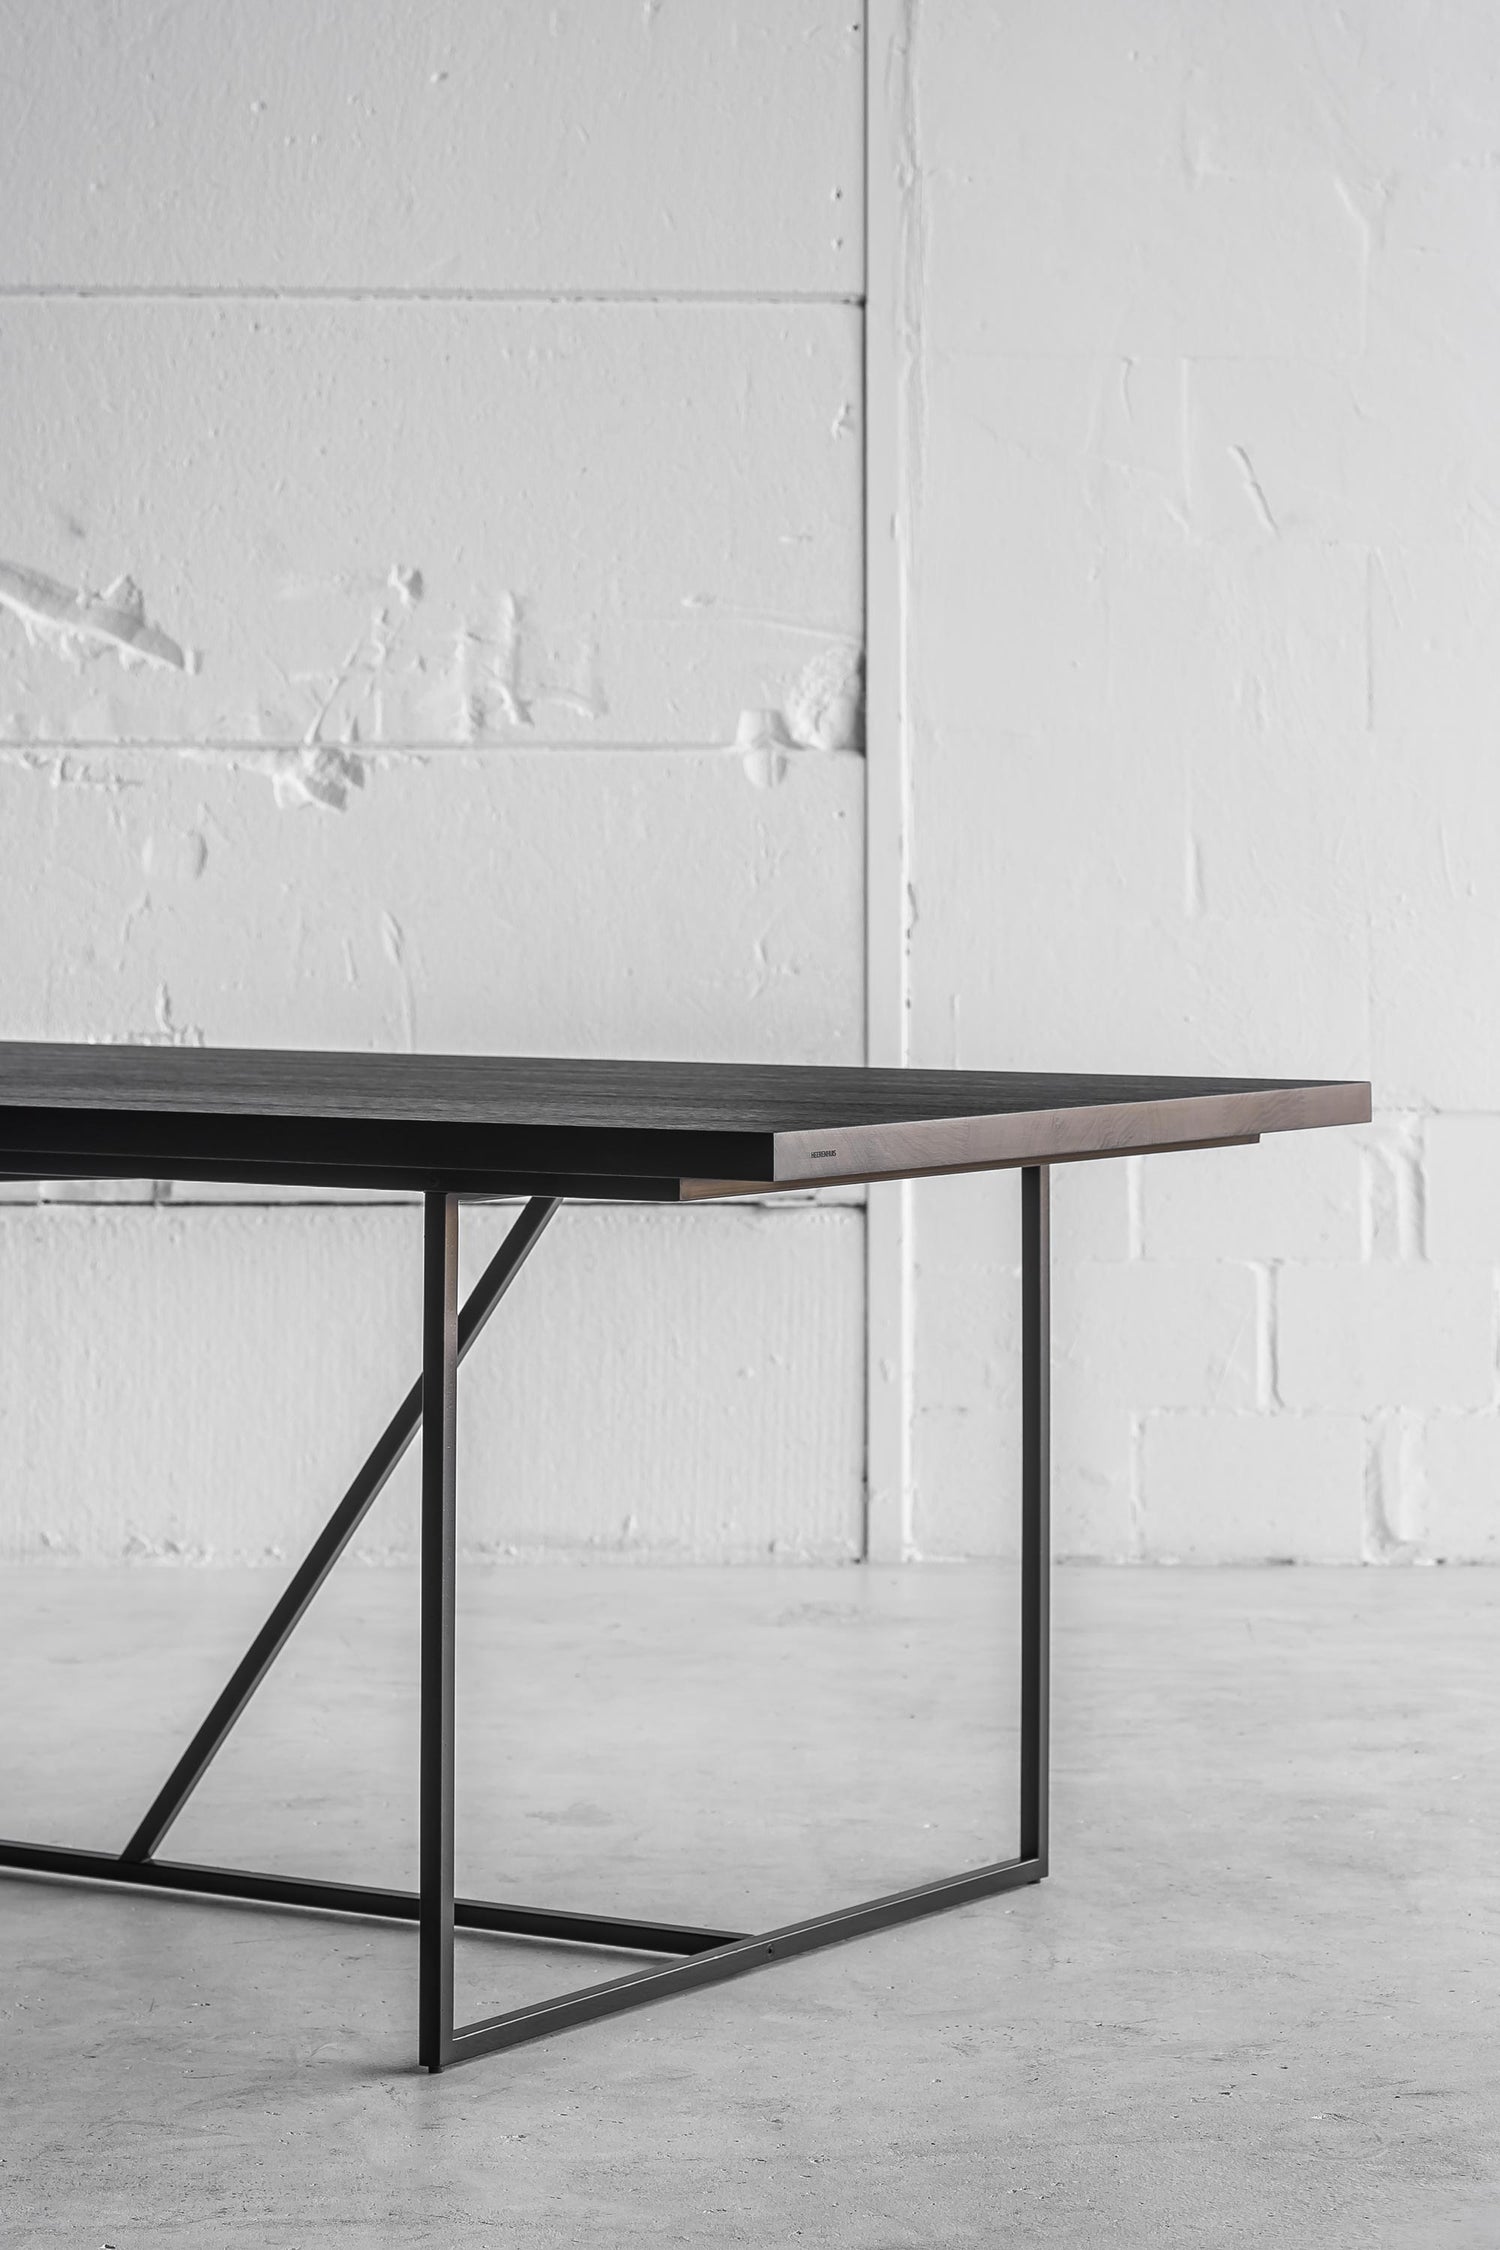 Long Mesa Nero Outdoor Table by Heerenhuis made from thick black Fraké wood with a steel base.